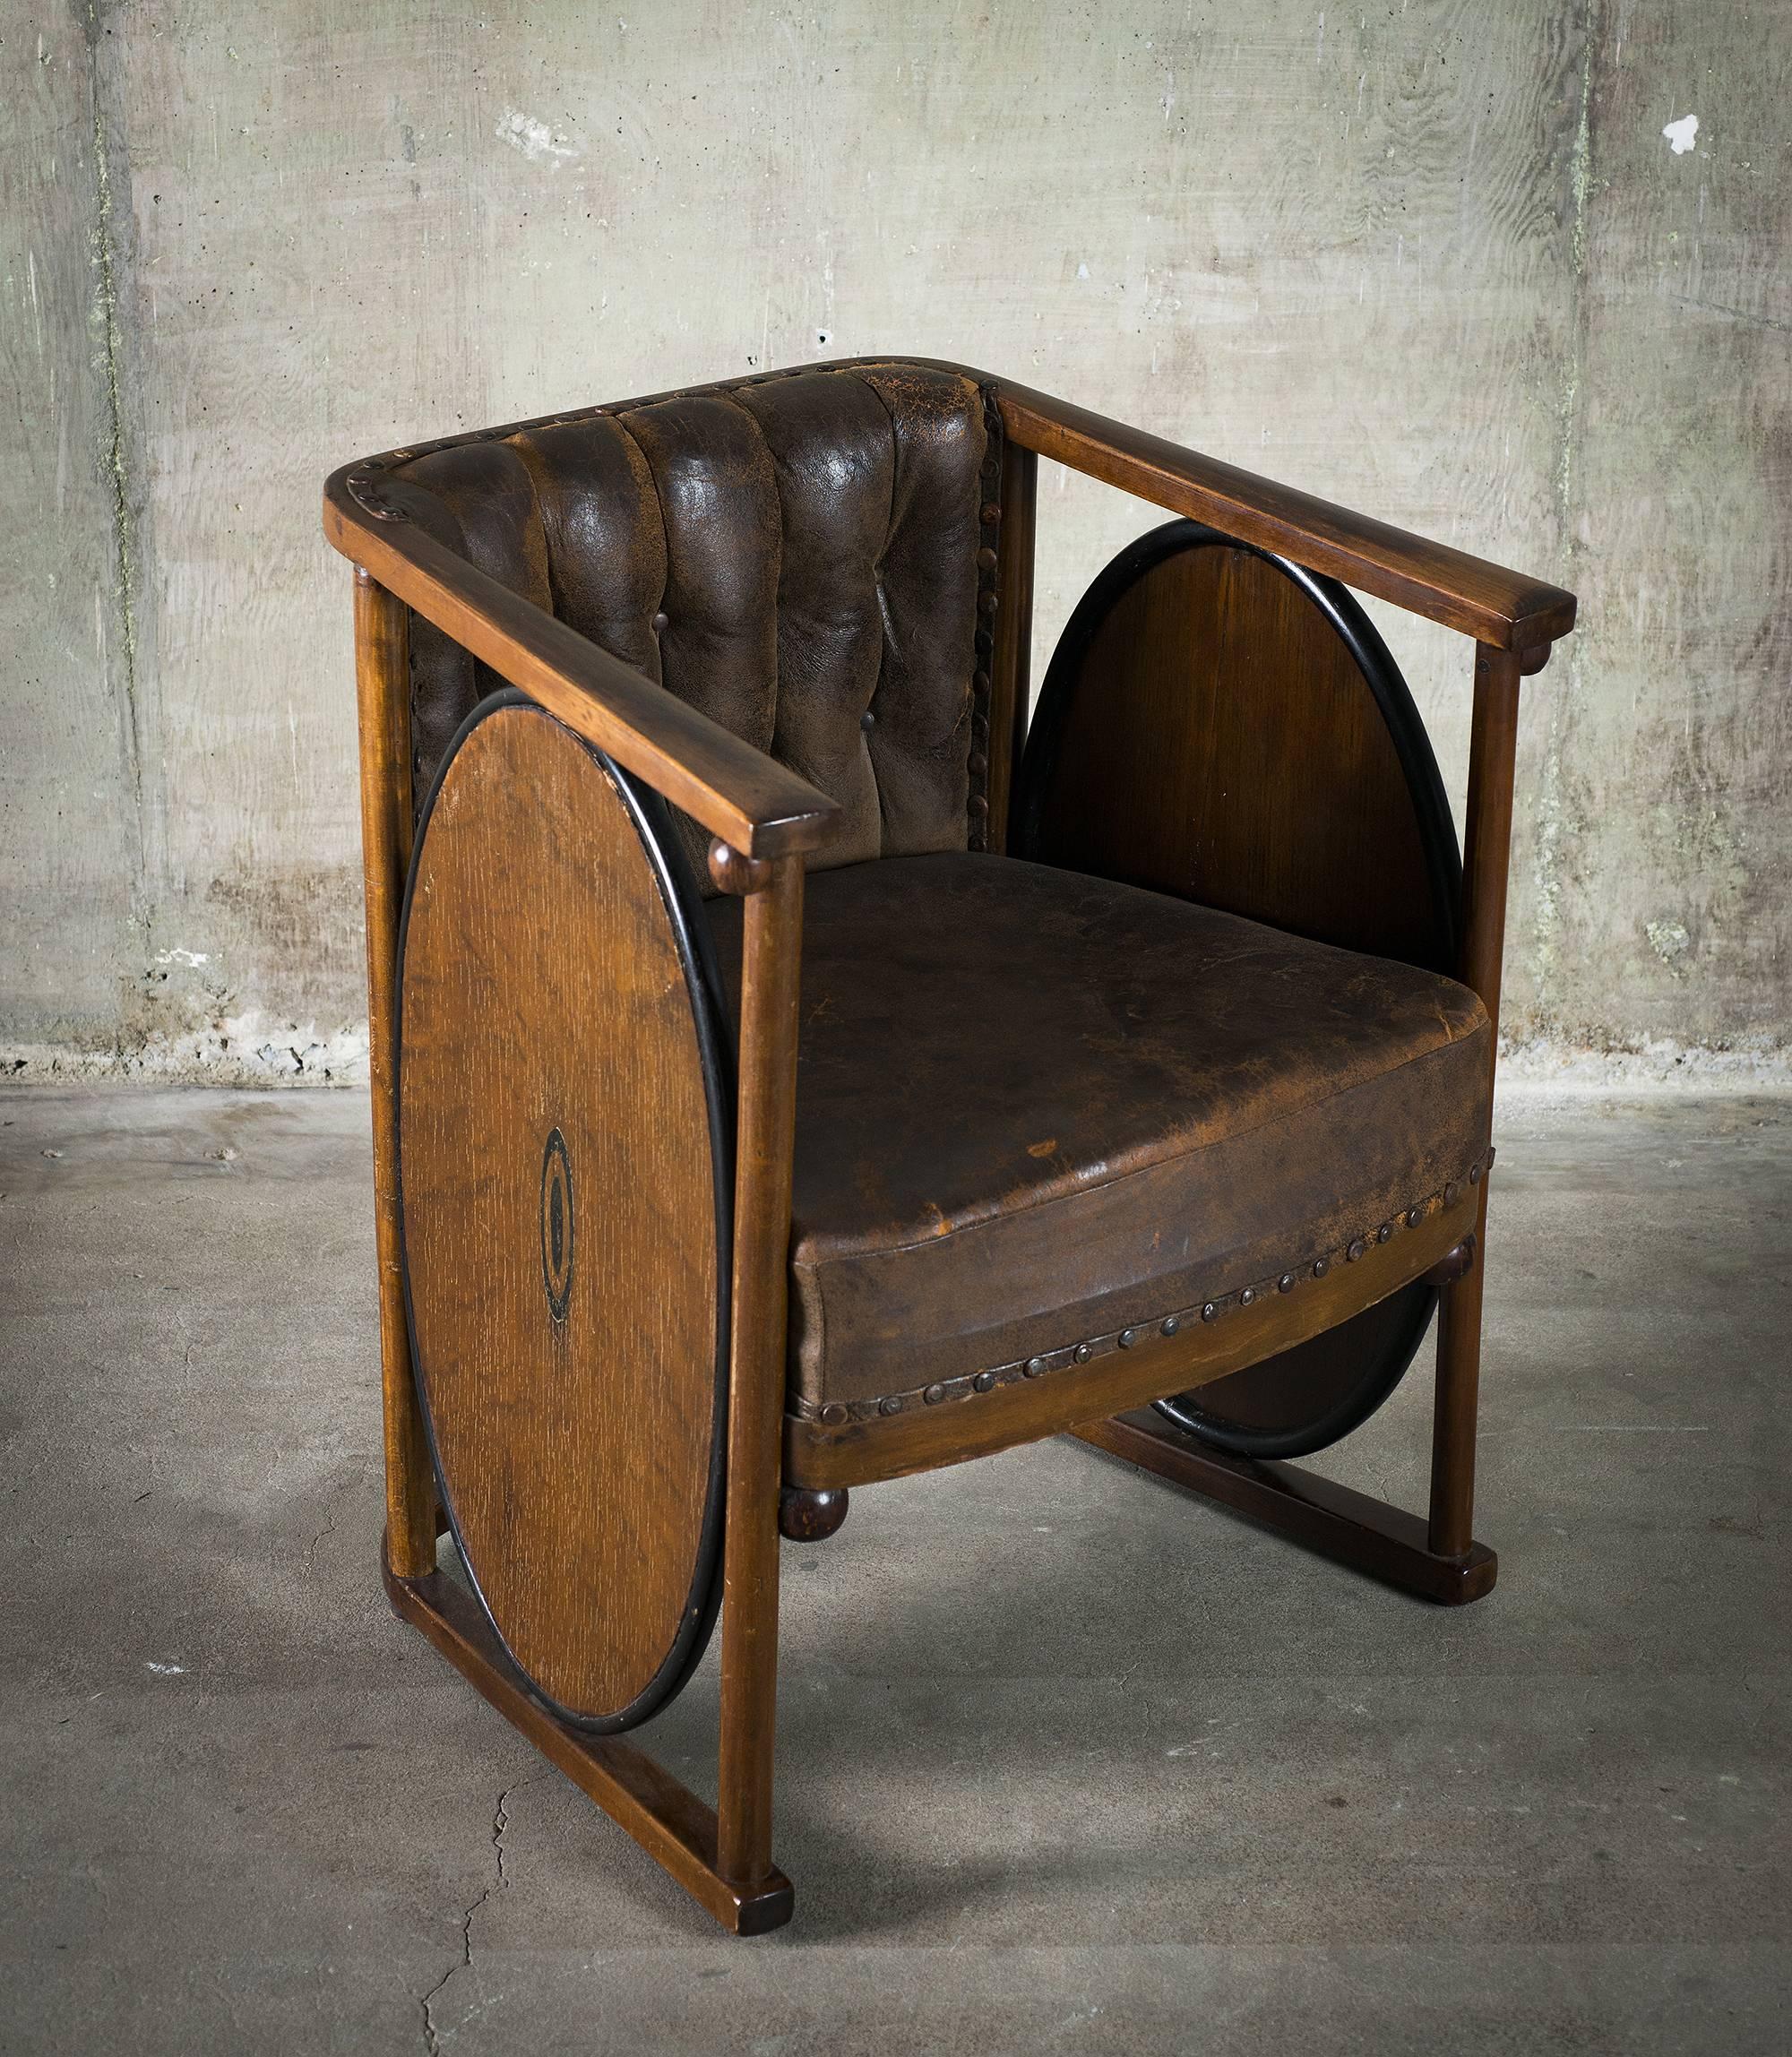 This rare and unusual armchair inlaid made of bent beech and plywood, marquetry, leather, brass inlays is attributed to Koloman Moser or Josef Hoffman, J&J. Kohn, Model No. 422, Austria, circa 1907.

Condition distressed, vintage, wear to